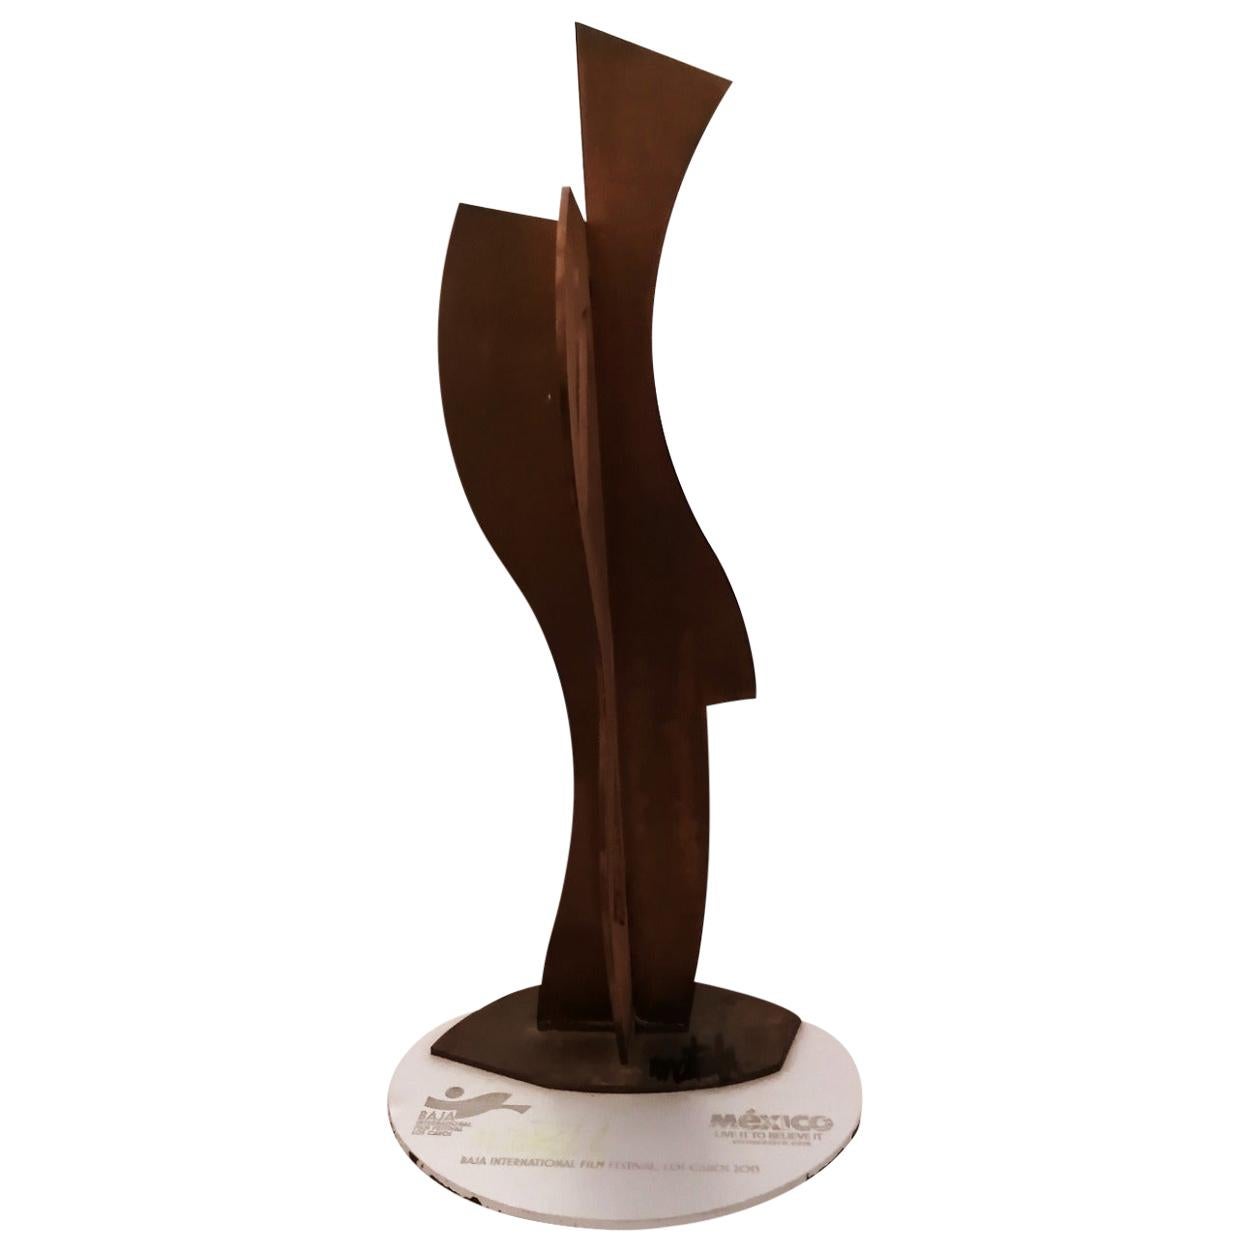 A statuette awarded in the 2013 edition of the Baja International Film Festival in Los Cabos, México. This is a patinated steel sculpture by Mexican artist Gabriel Macotela. The sculpture is signed on the base and the silver plastic plaque under it.